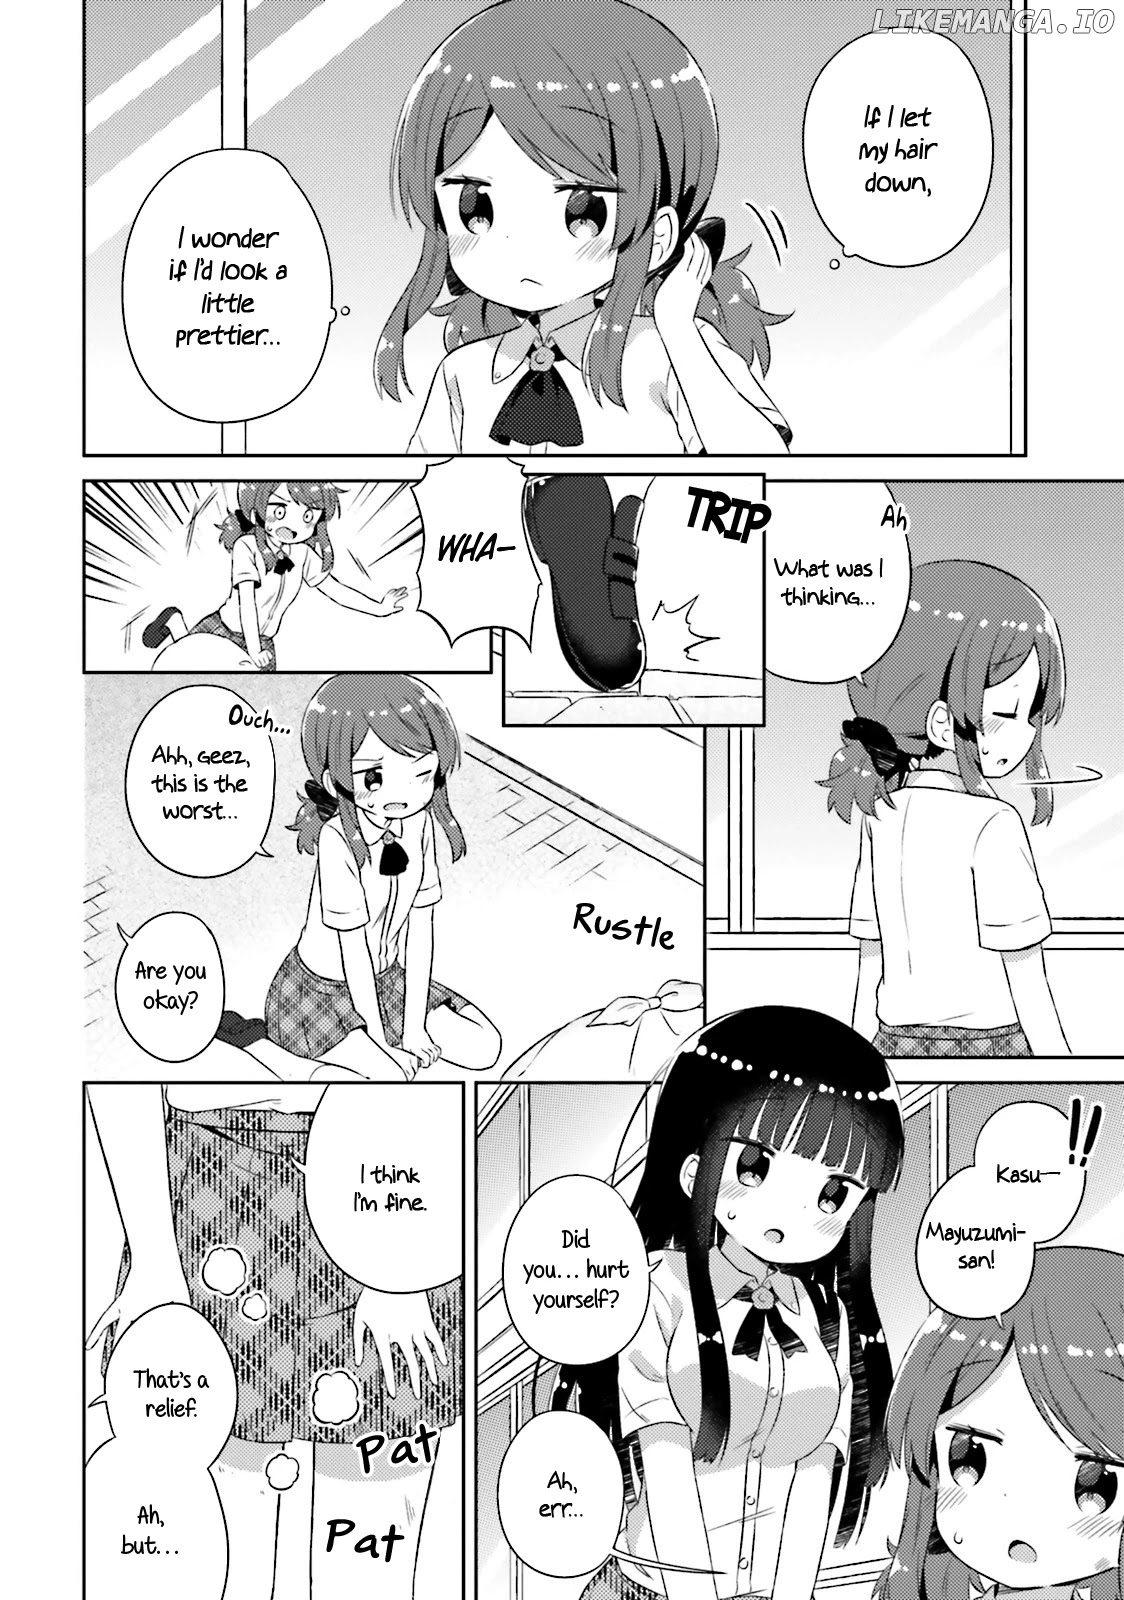 She Gets Girls Everyday. chapter 18.5 - page 5